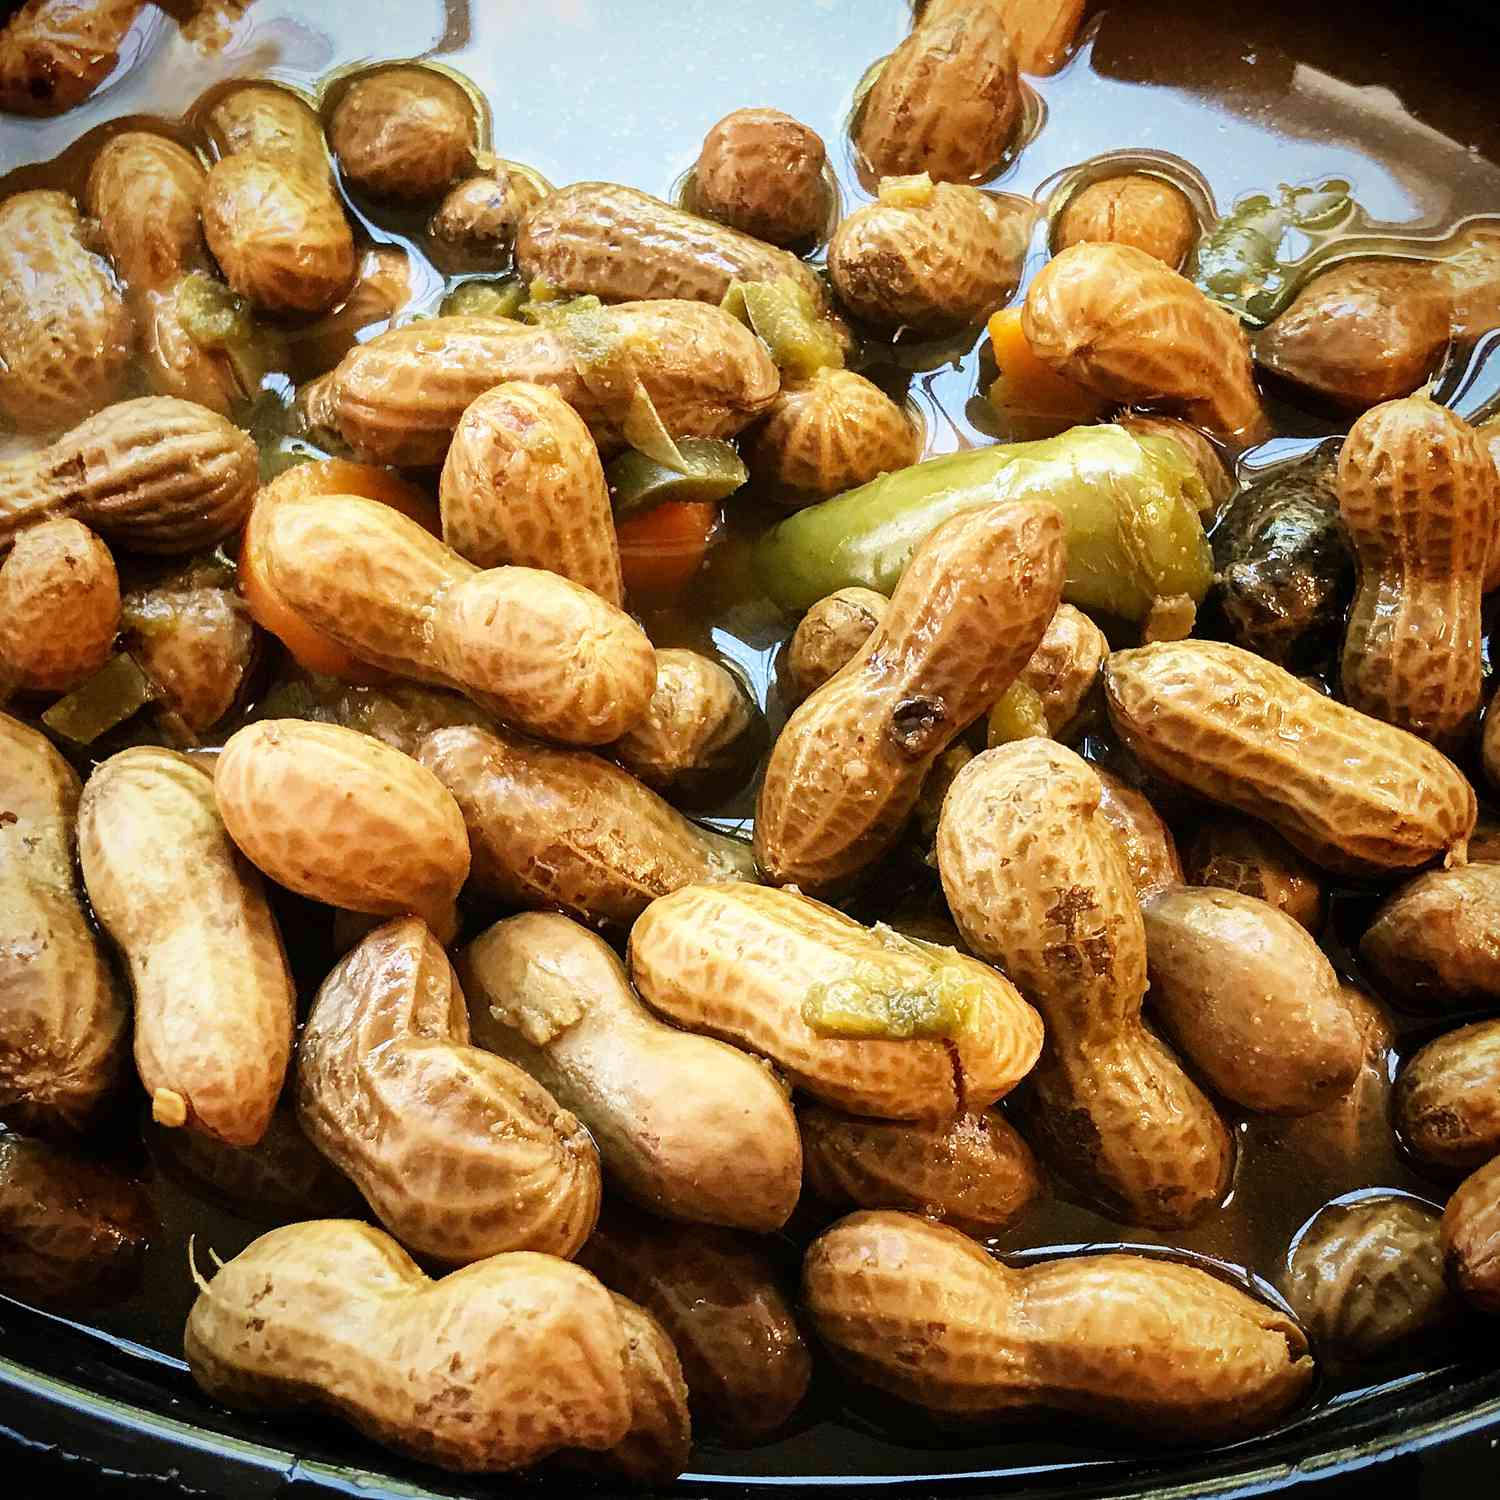 Rachaels Superheated Cajun Boiled Peanuts: Flavorful, Nutritious, and Convenient Snacks